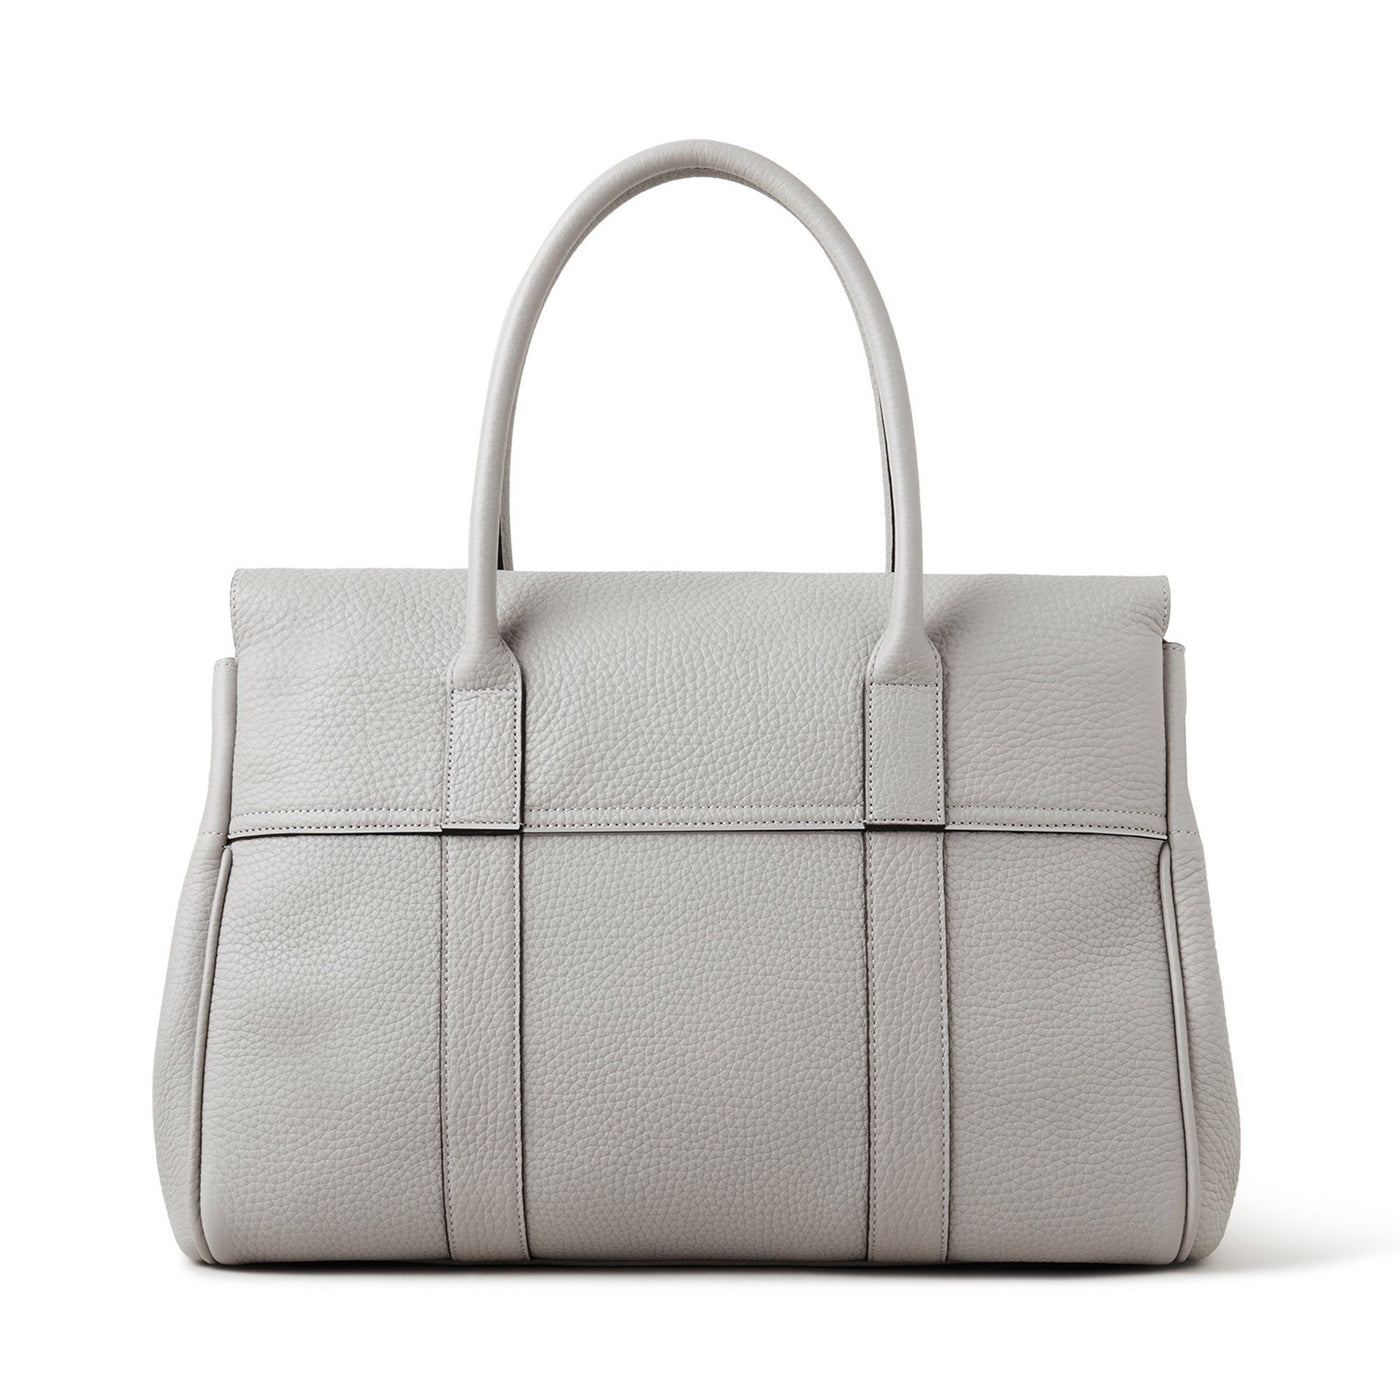 MULBERRY-Bayswater-Pale-Grey-2